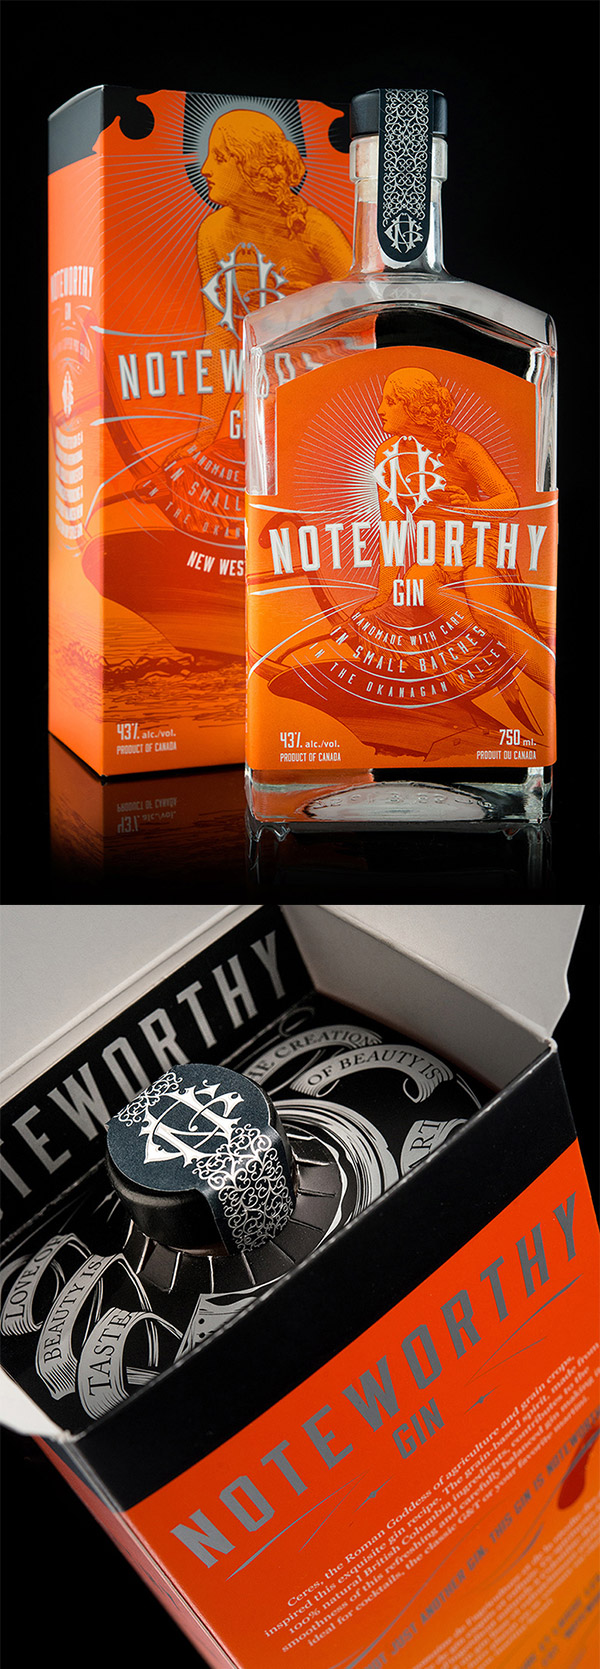 Noteworthy Gin Packaging by Hired Guns Creative